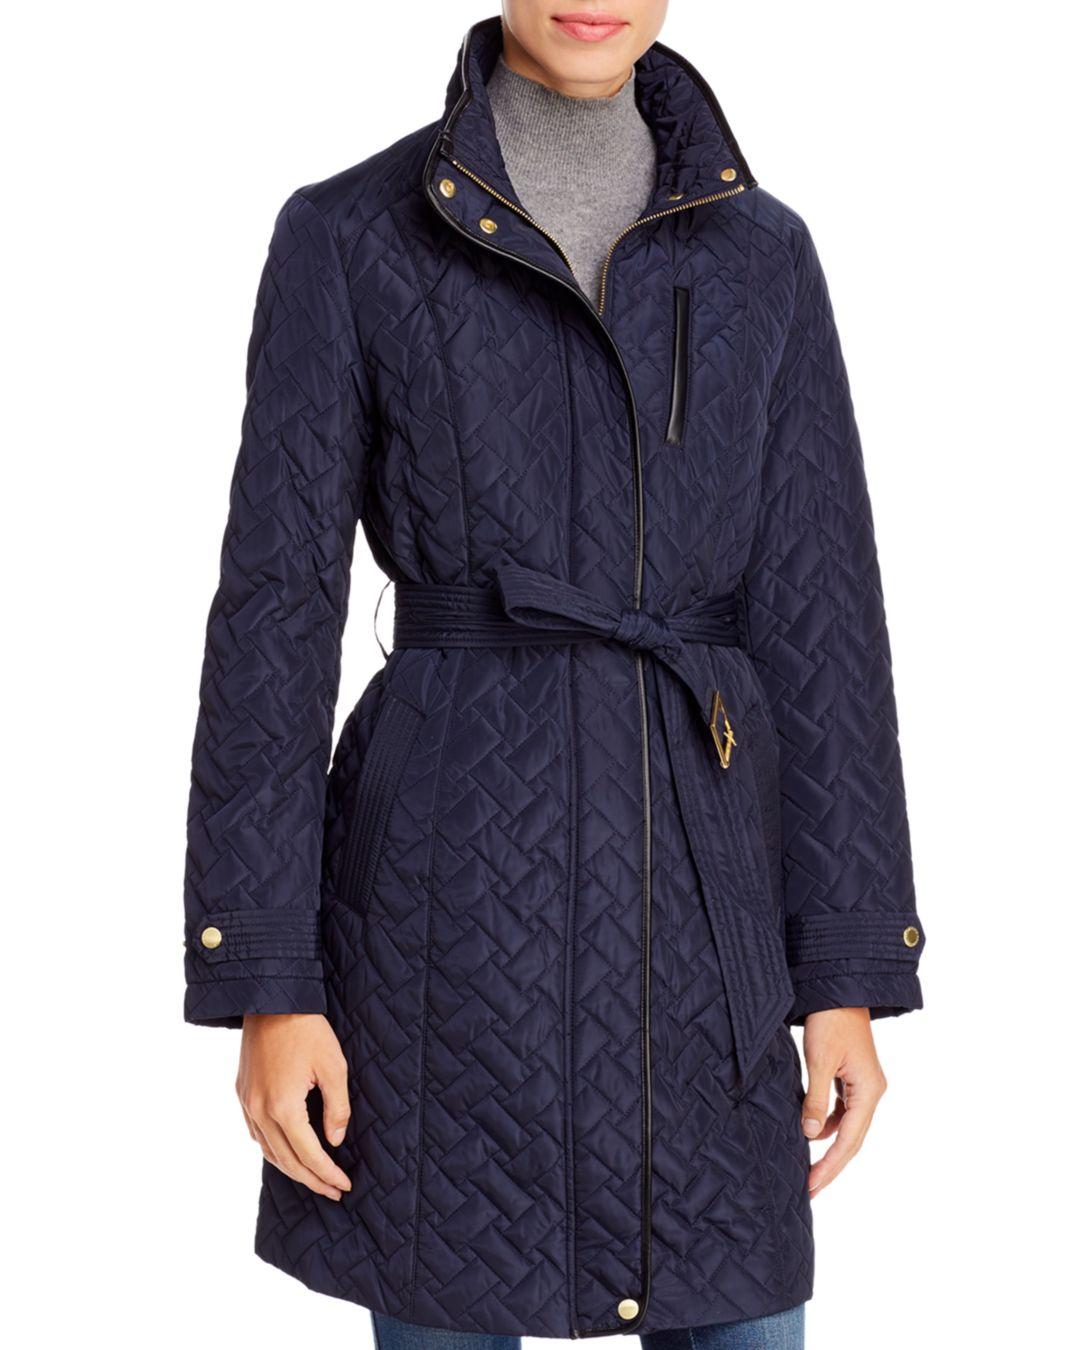 Cole Haan Synthetic Quilted Jacket in Dark Navy (Blue) - Lyst